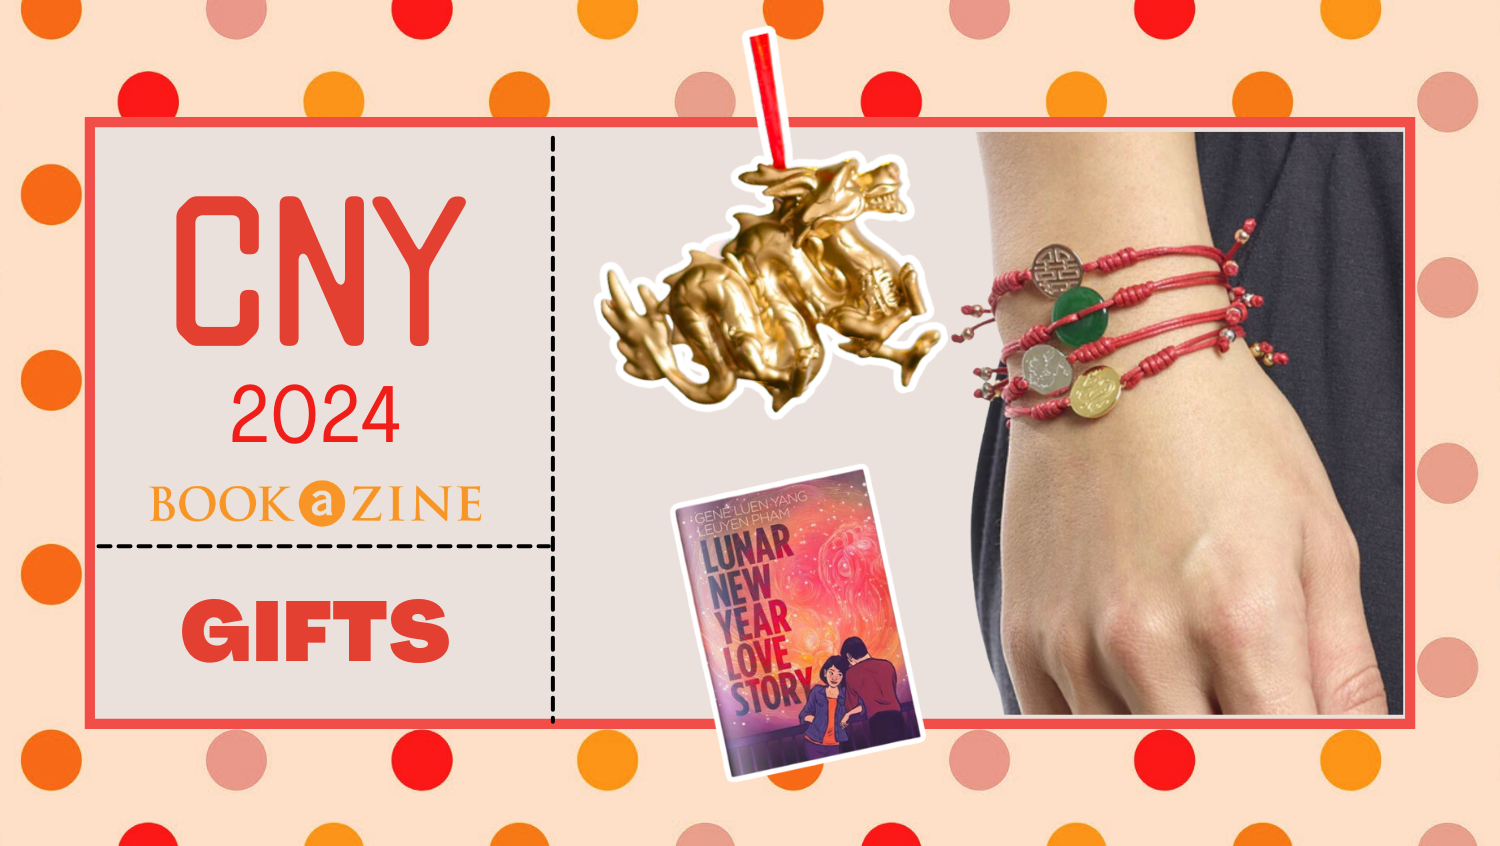 Enter The Dragon: Books and Gifts for CNY!